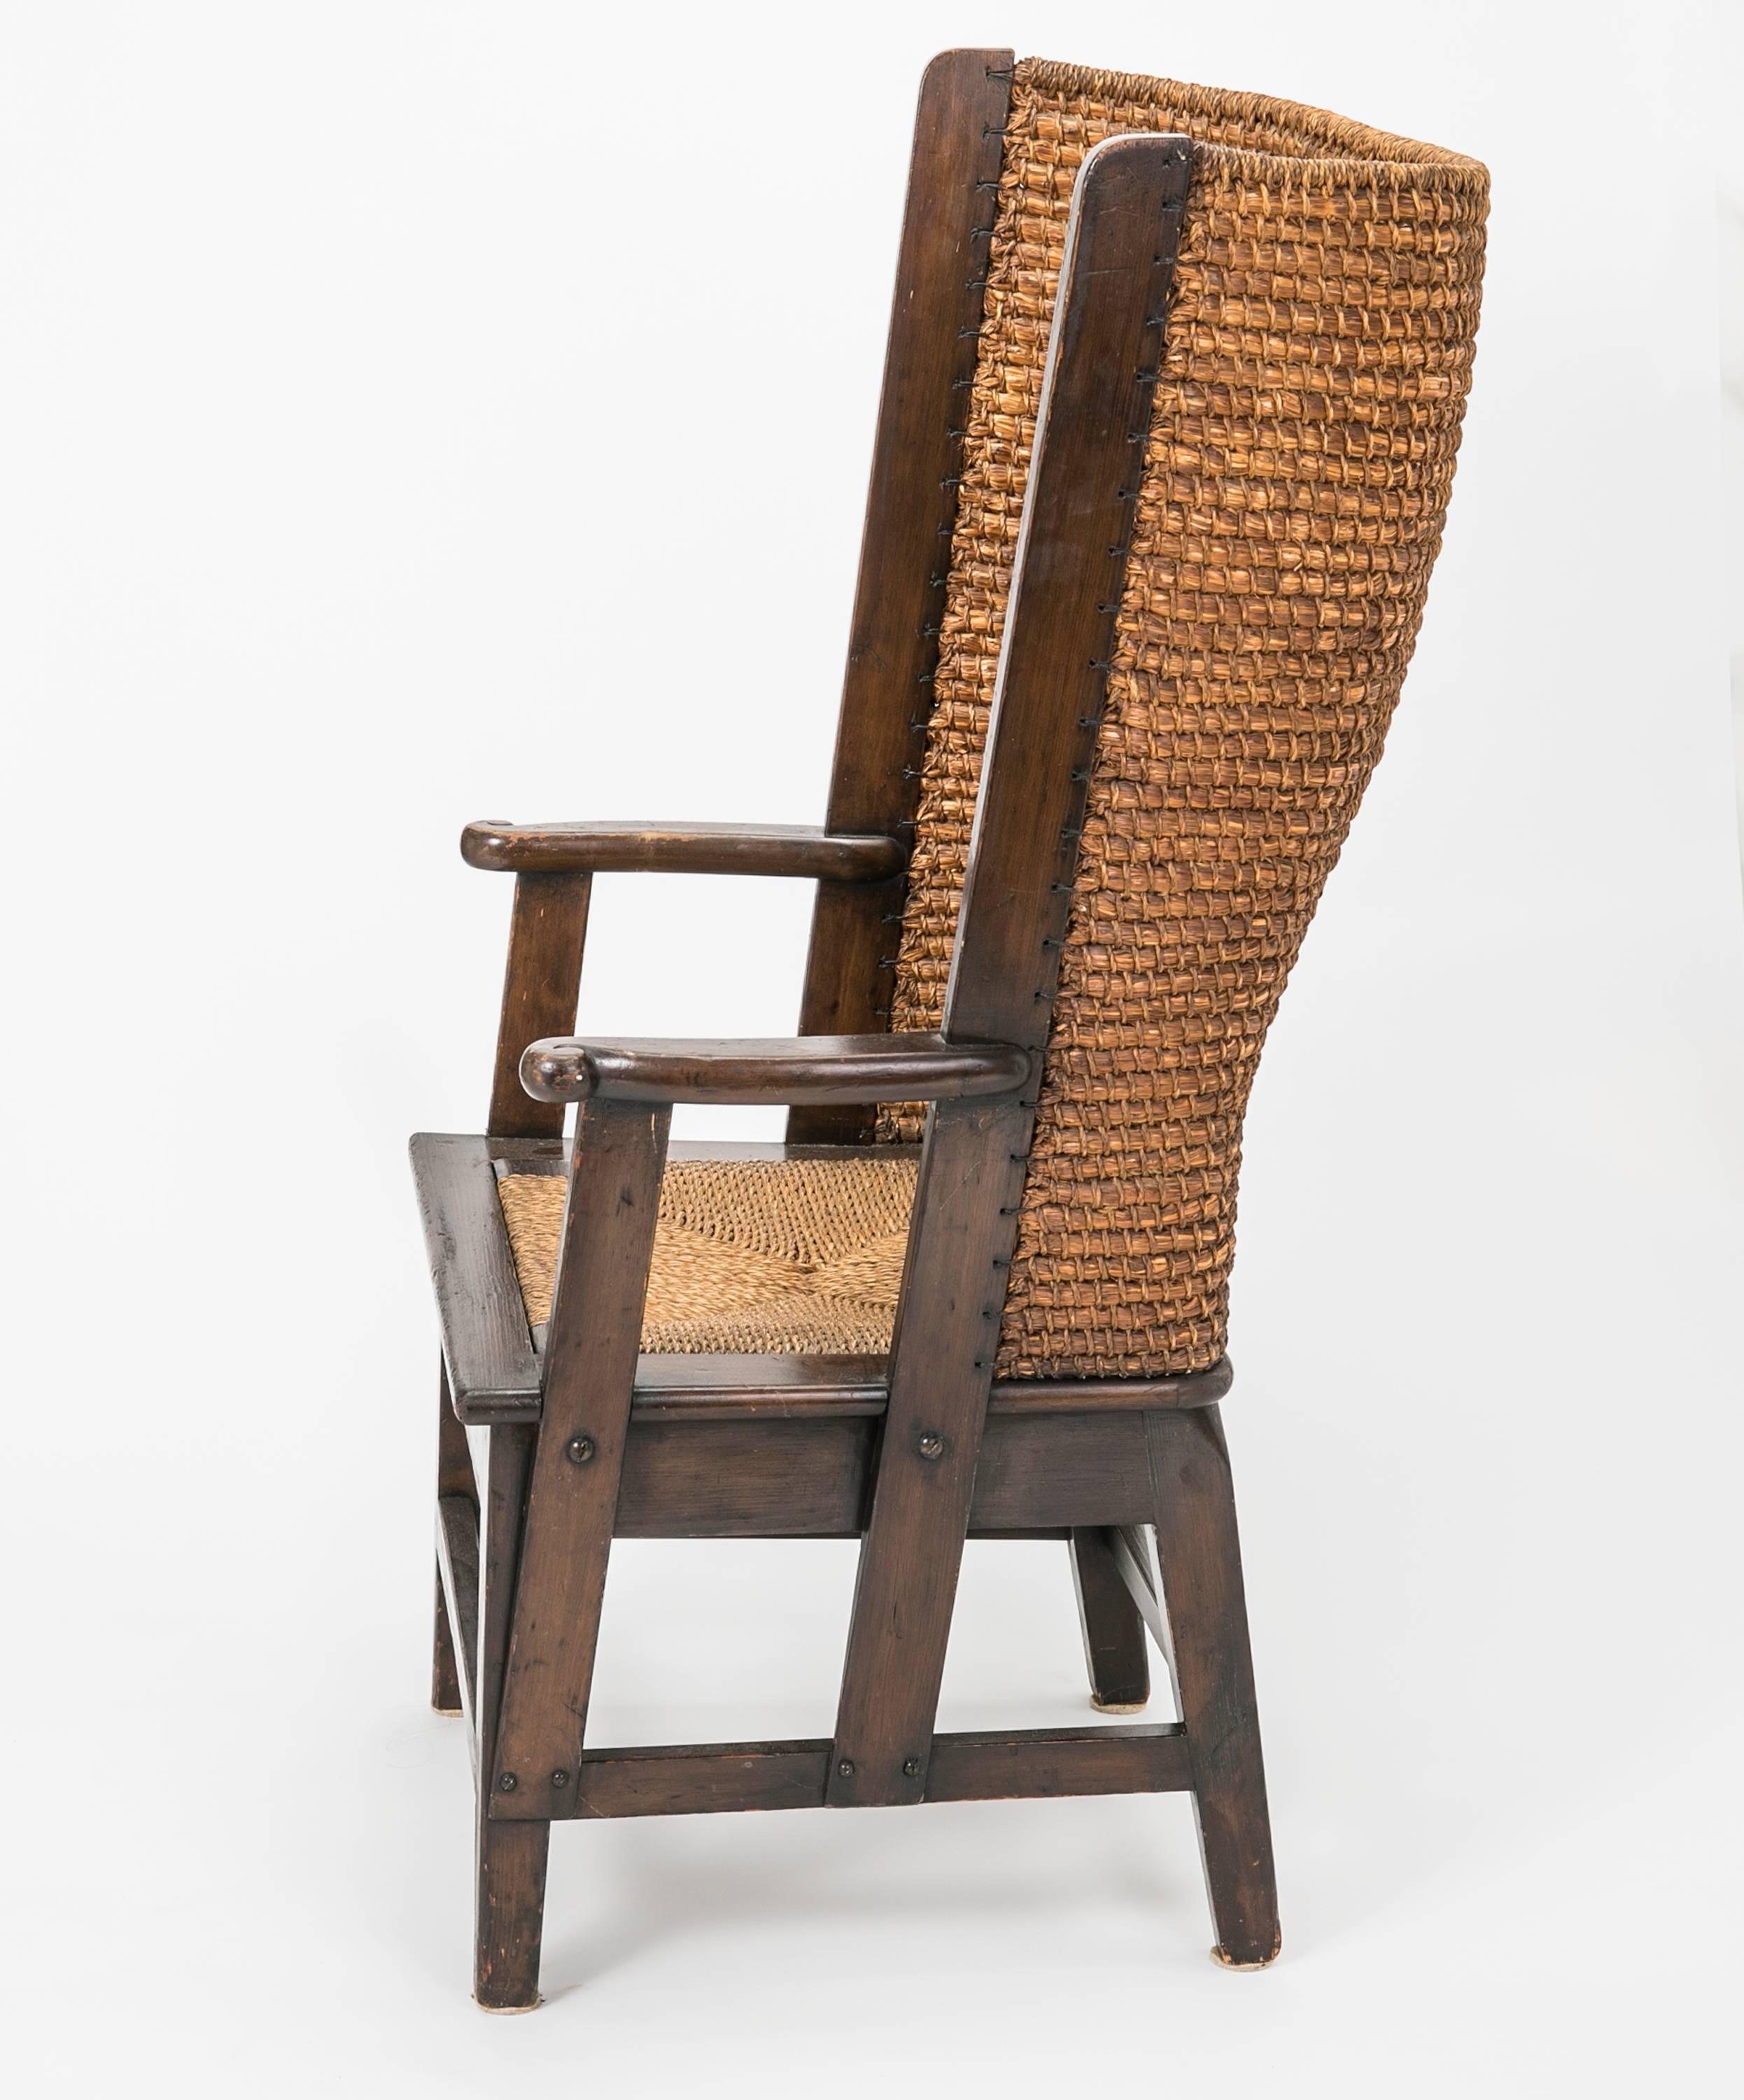 Hand-Woven Antique Rush Chair, Scottish Orkney